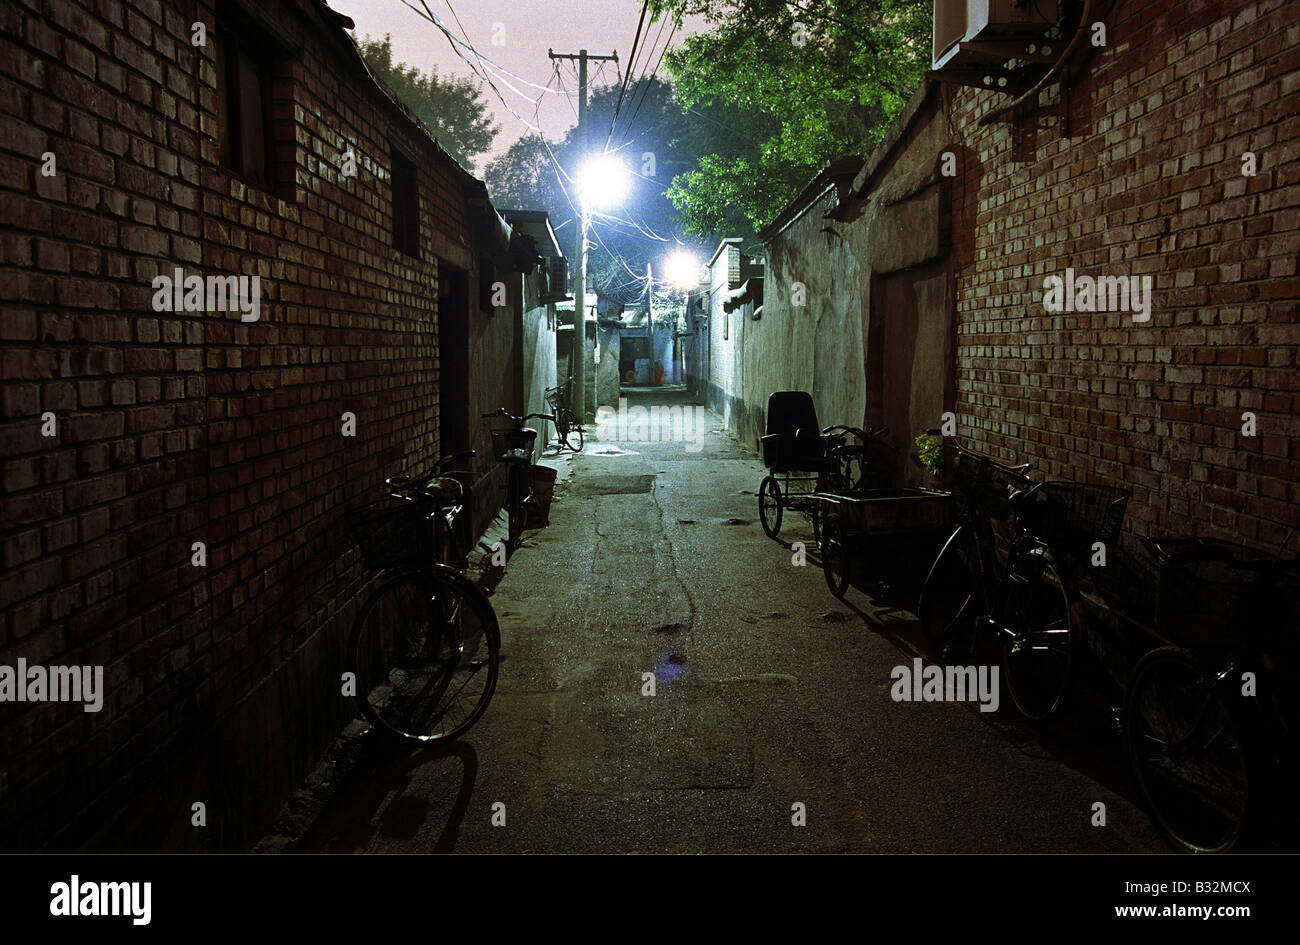 Traditional Structure In Hutong,Beijing,China Stock Photo - Alamy